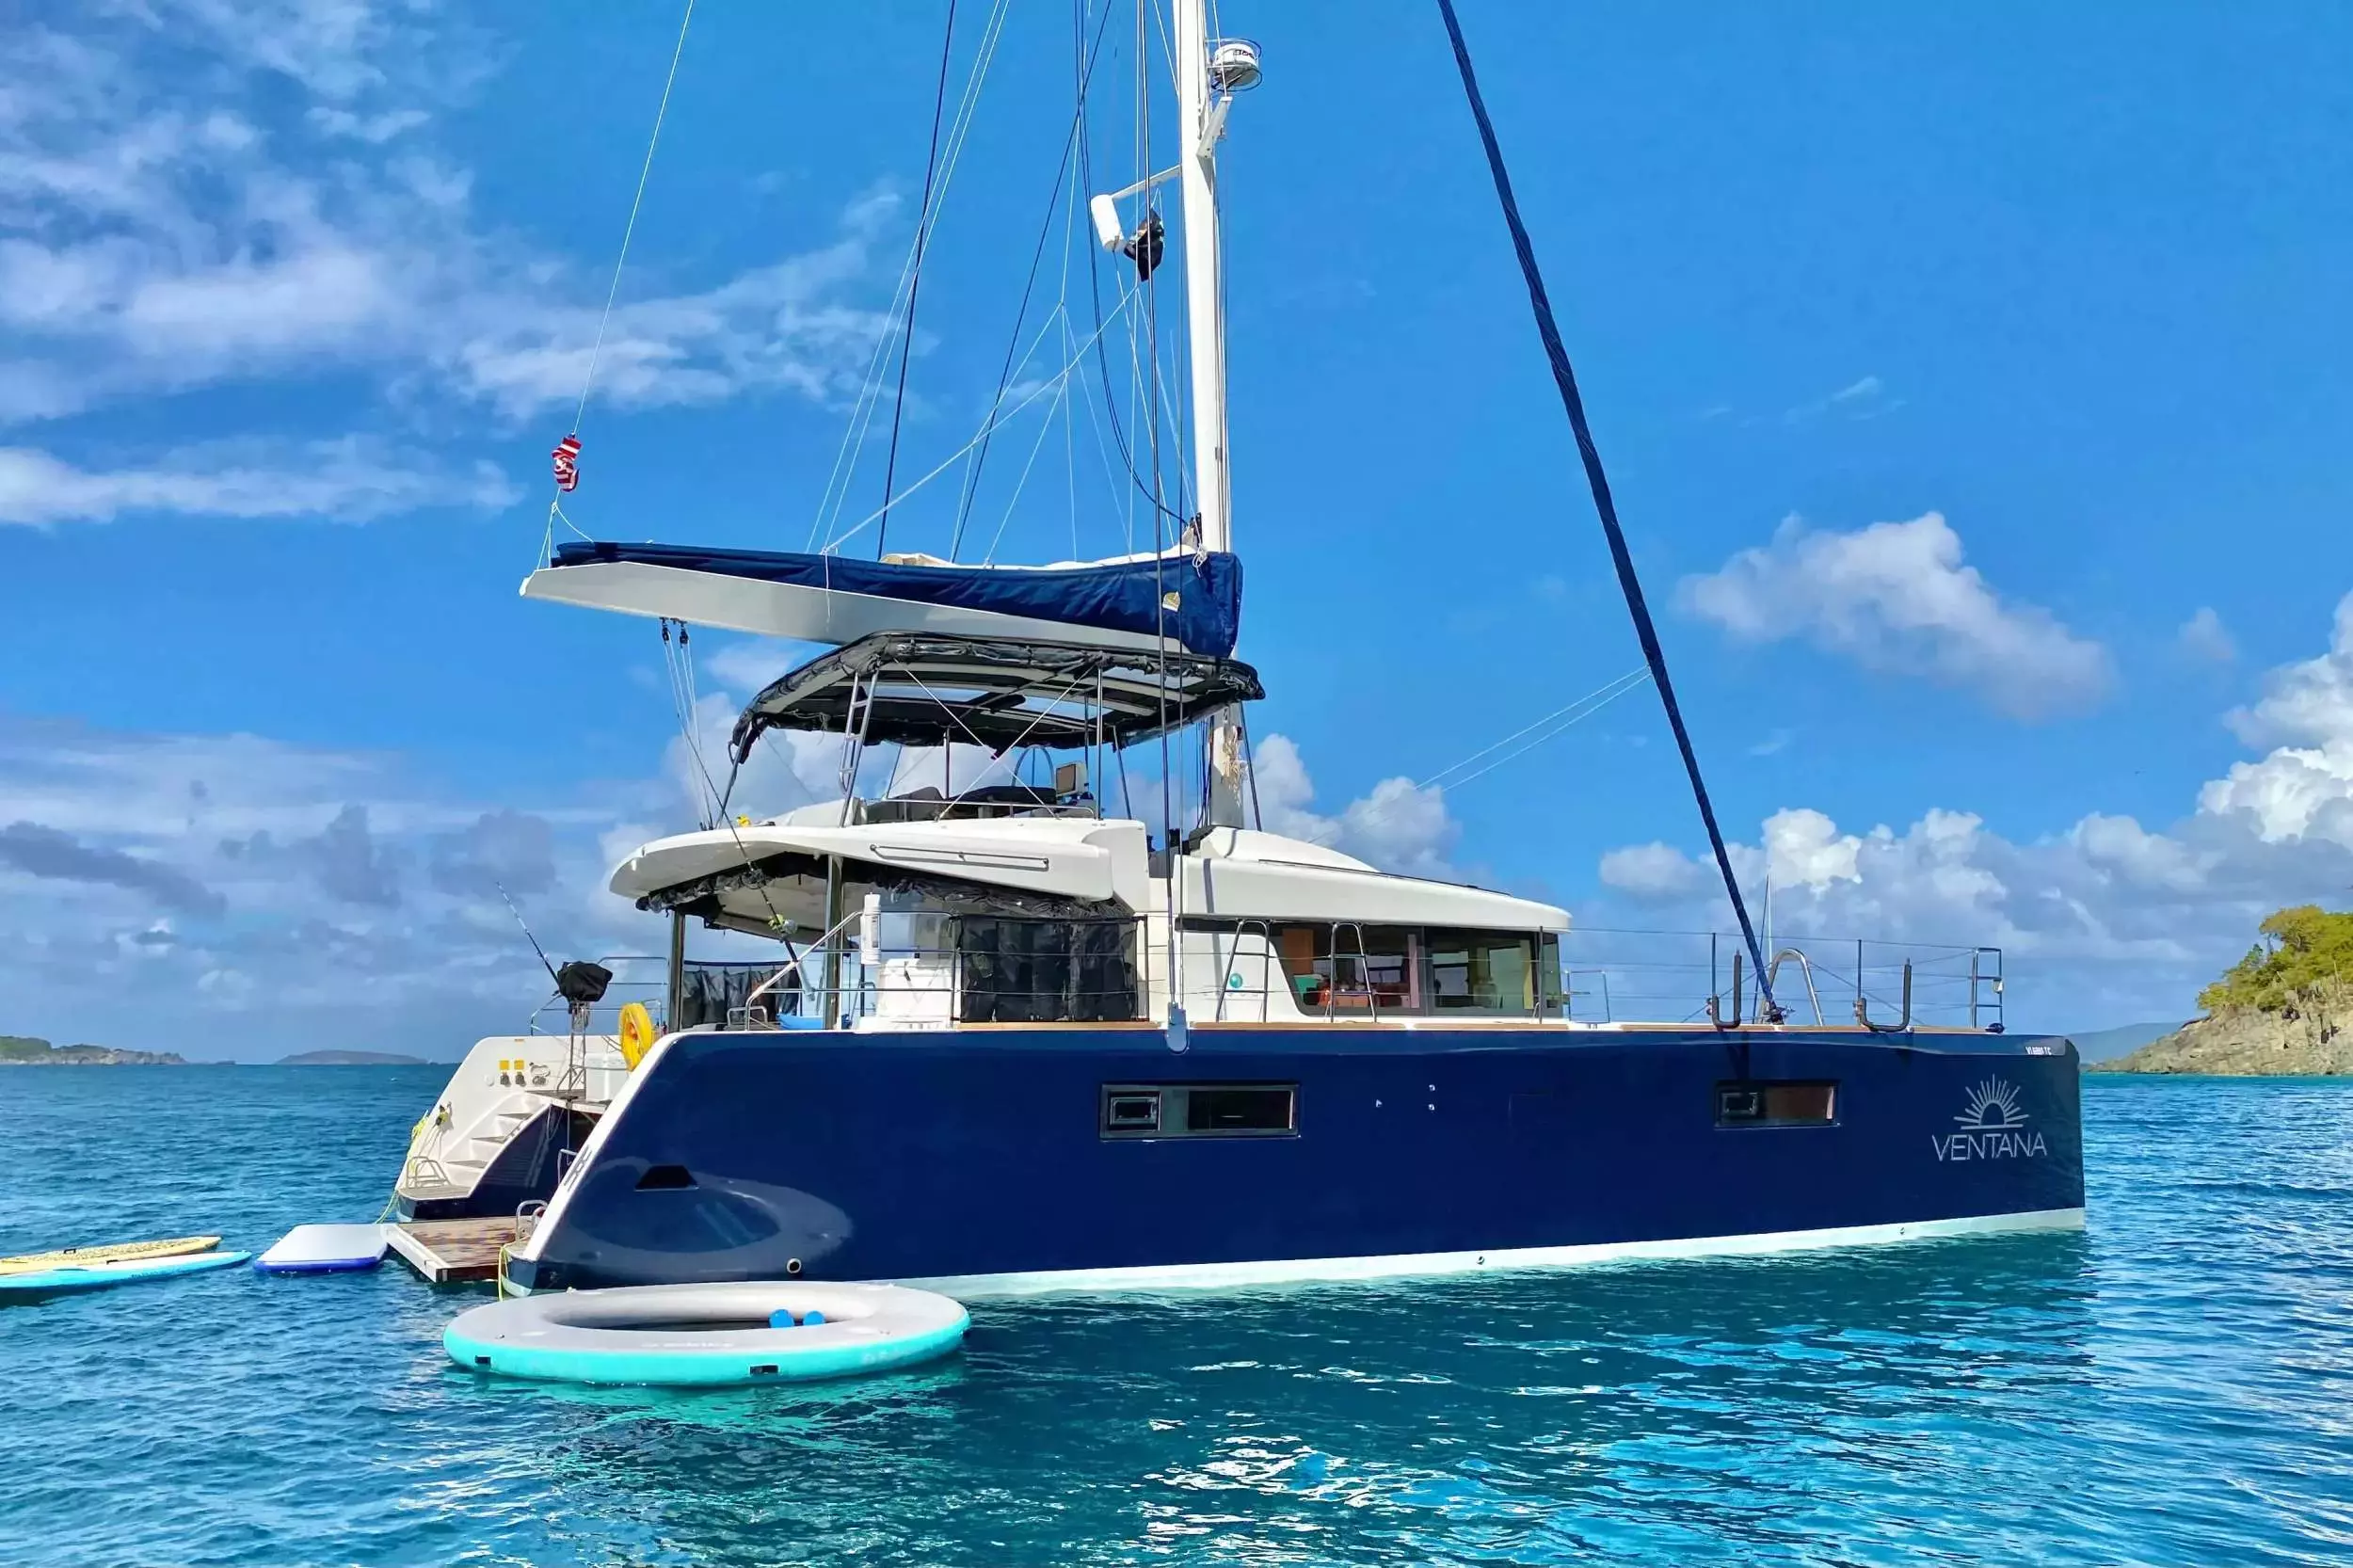 Ventana al Mar by Lagoon - Top rates for a Rental of a private Sailing Catamaran in Belize